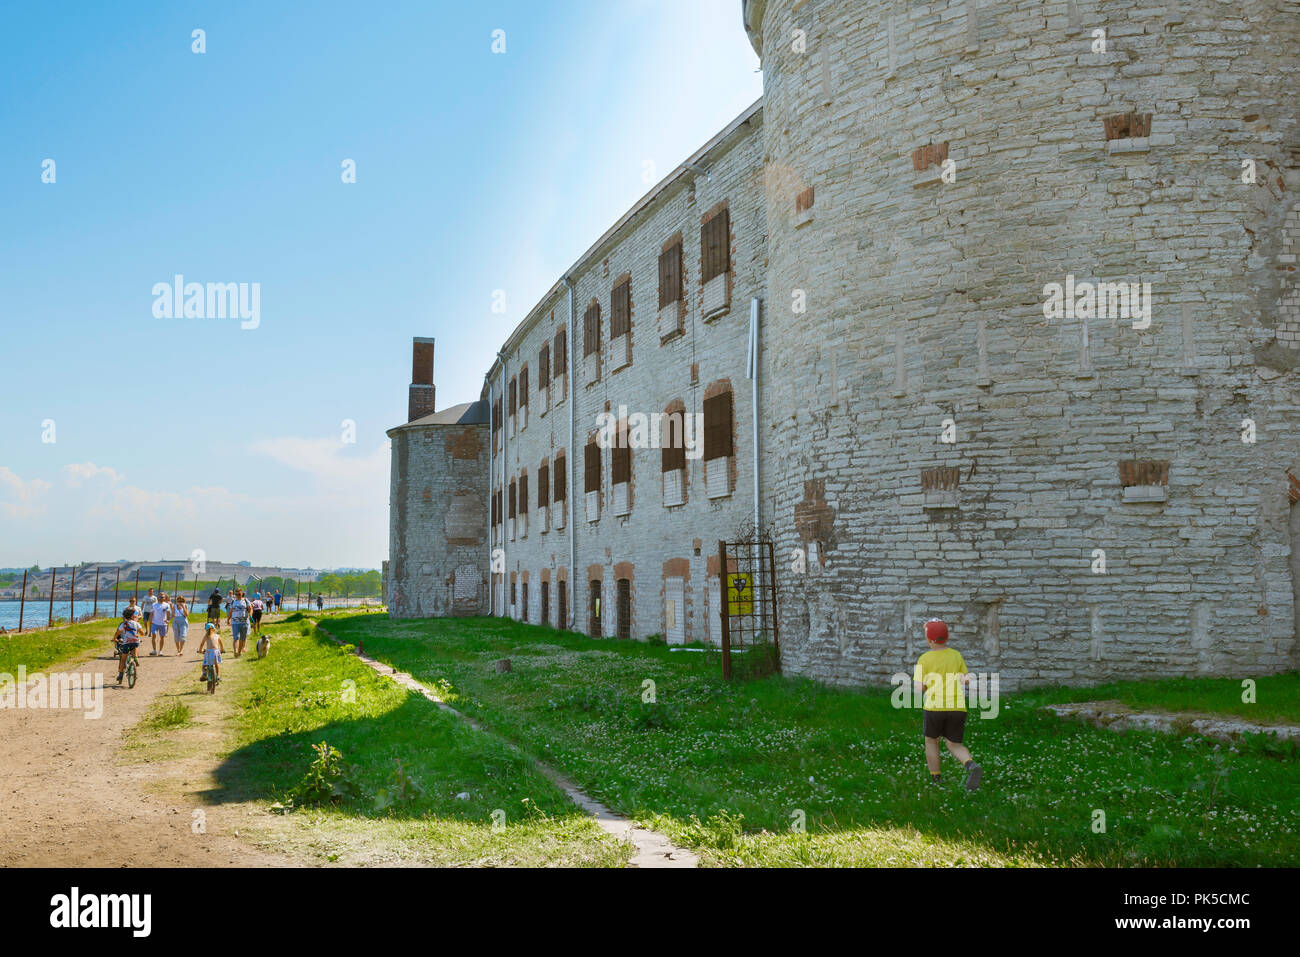 Patarei Prison, on a summer afternoon people walk past the abandoned and derelict Patarei Prison building in the Kalamaja bay area of Tallinn, Estonia Stock Photo